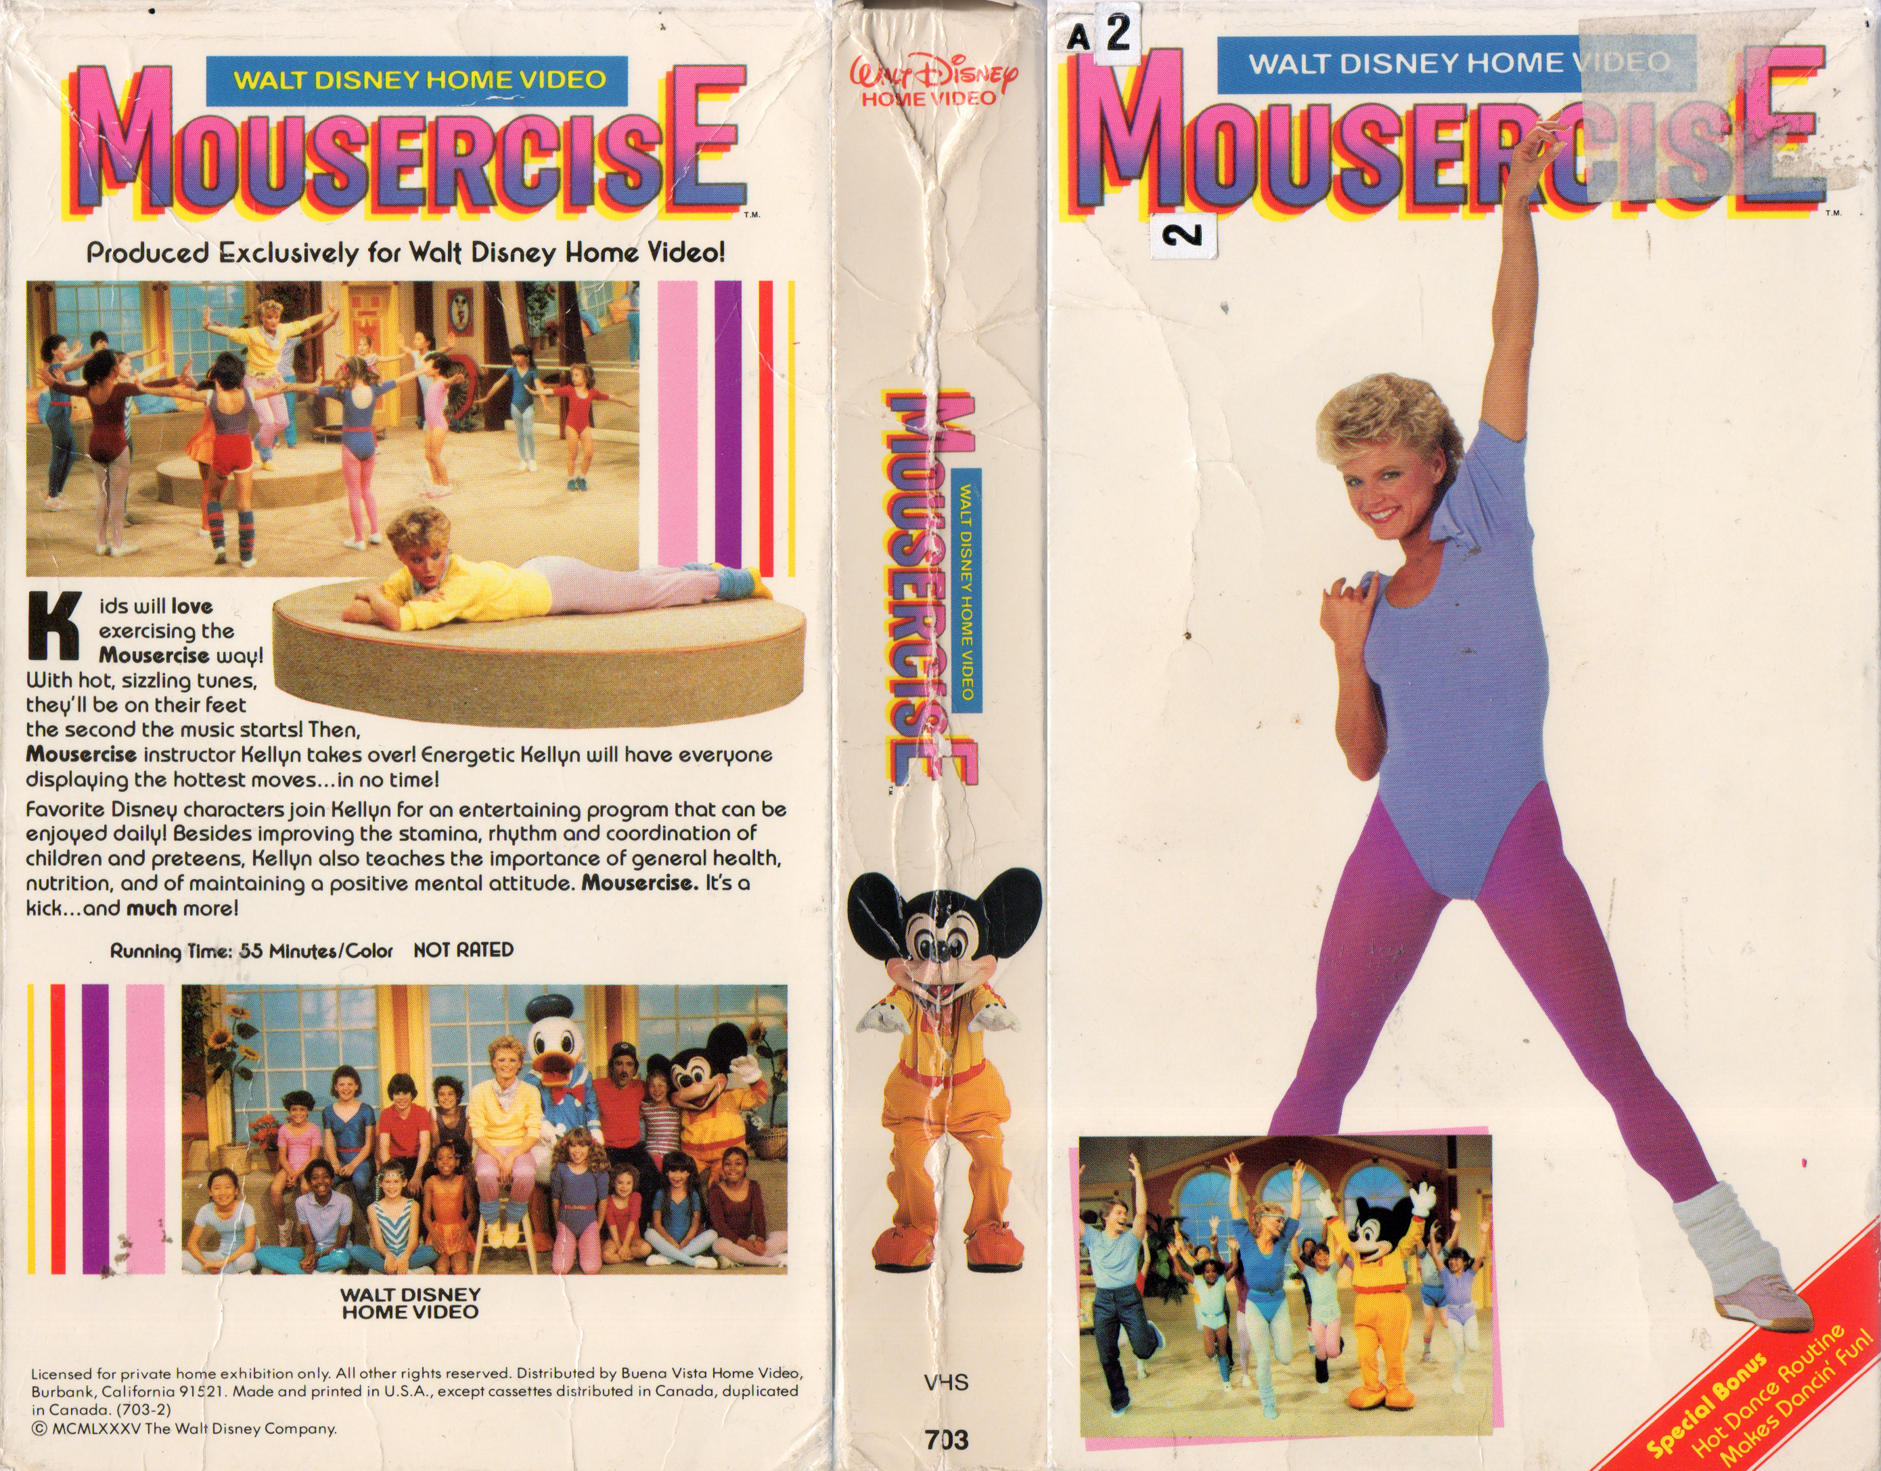 March 29 2016 VHS cover scan - click for high res version mousercise - subm...